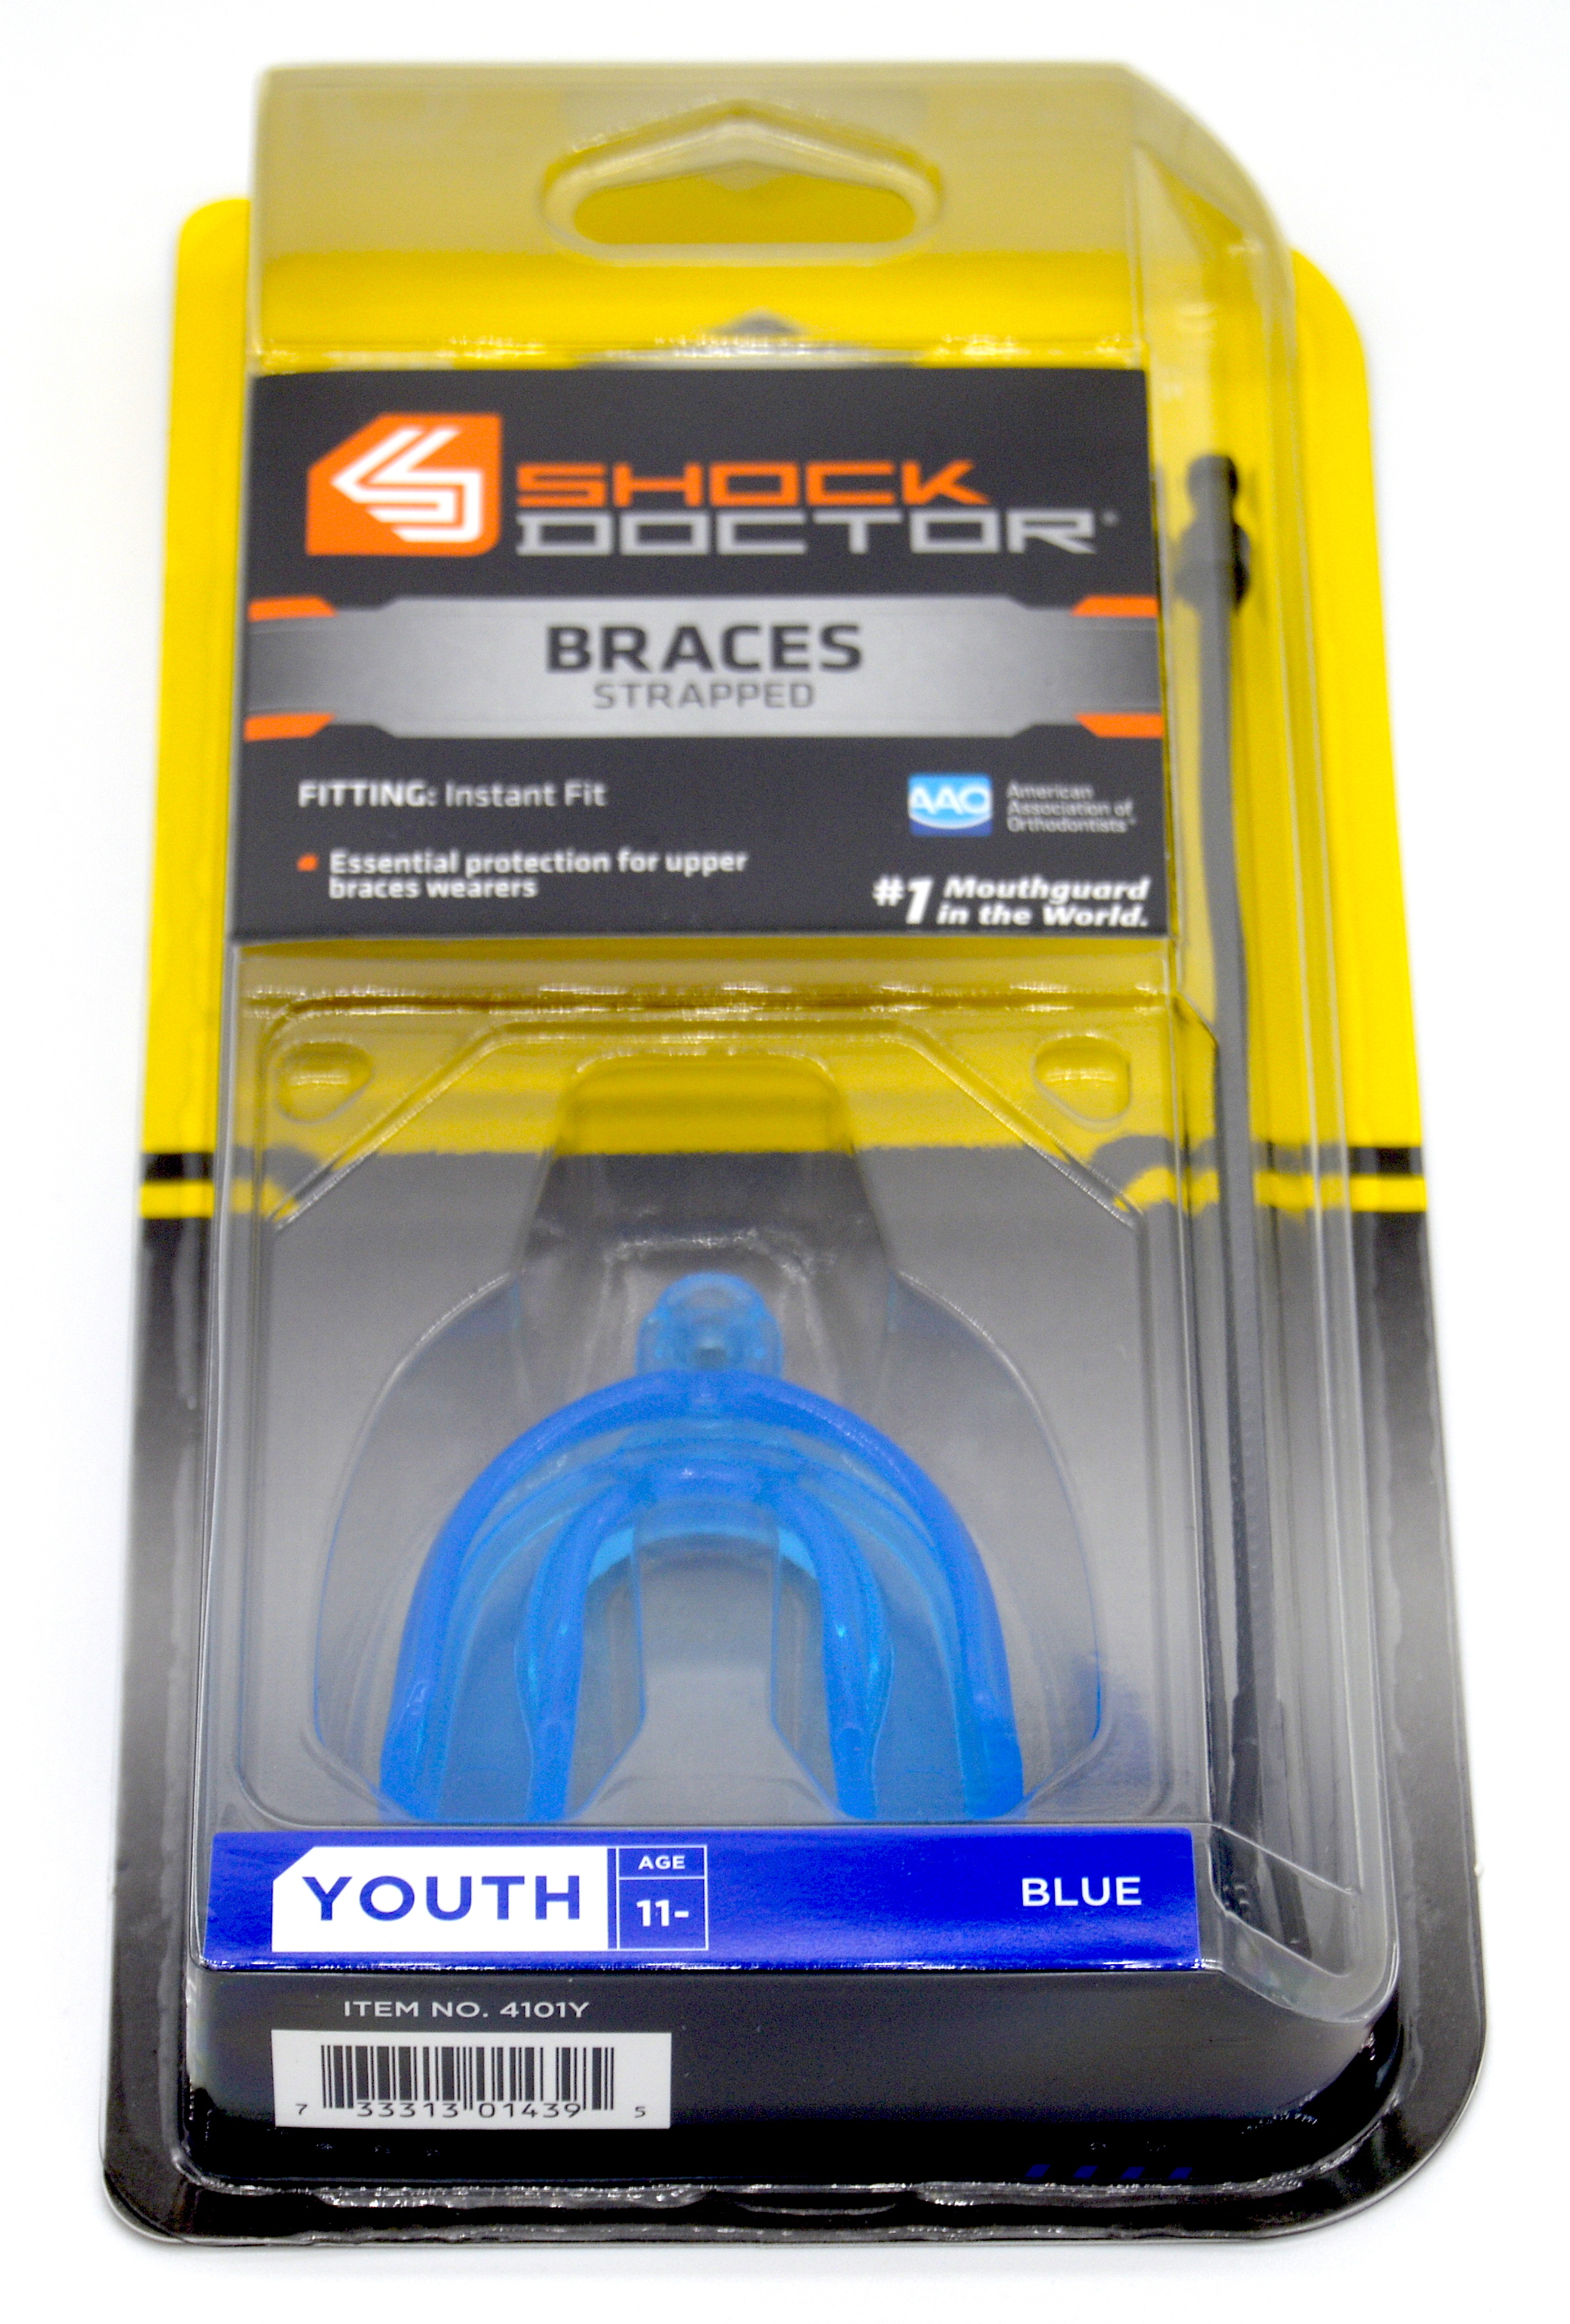 Shock Doctor Braces Mouthguard Youth 11- Strapped/Strapless, Blue/Red/Green 